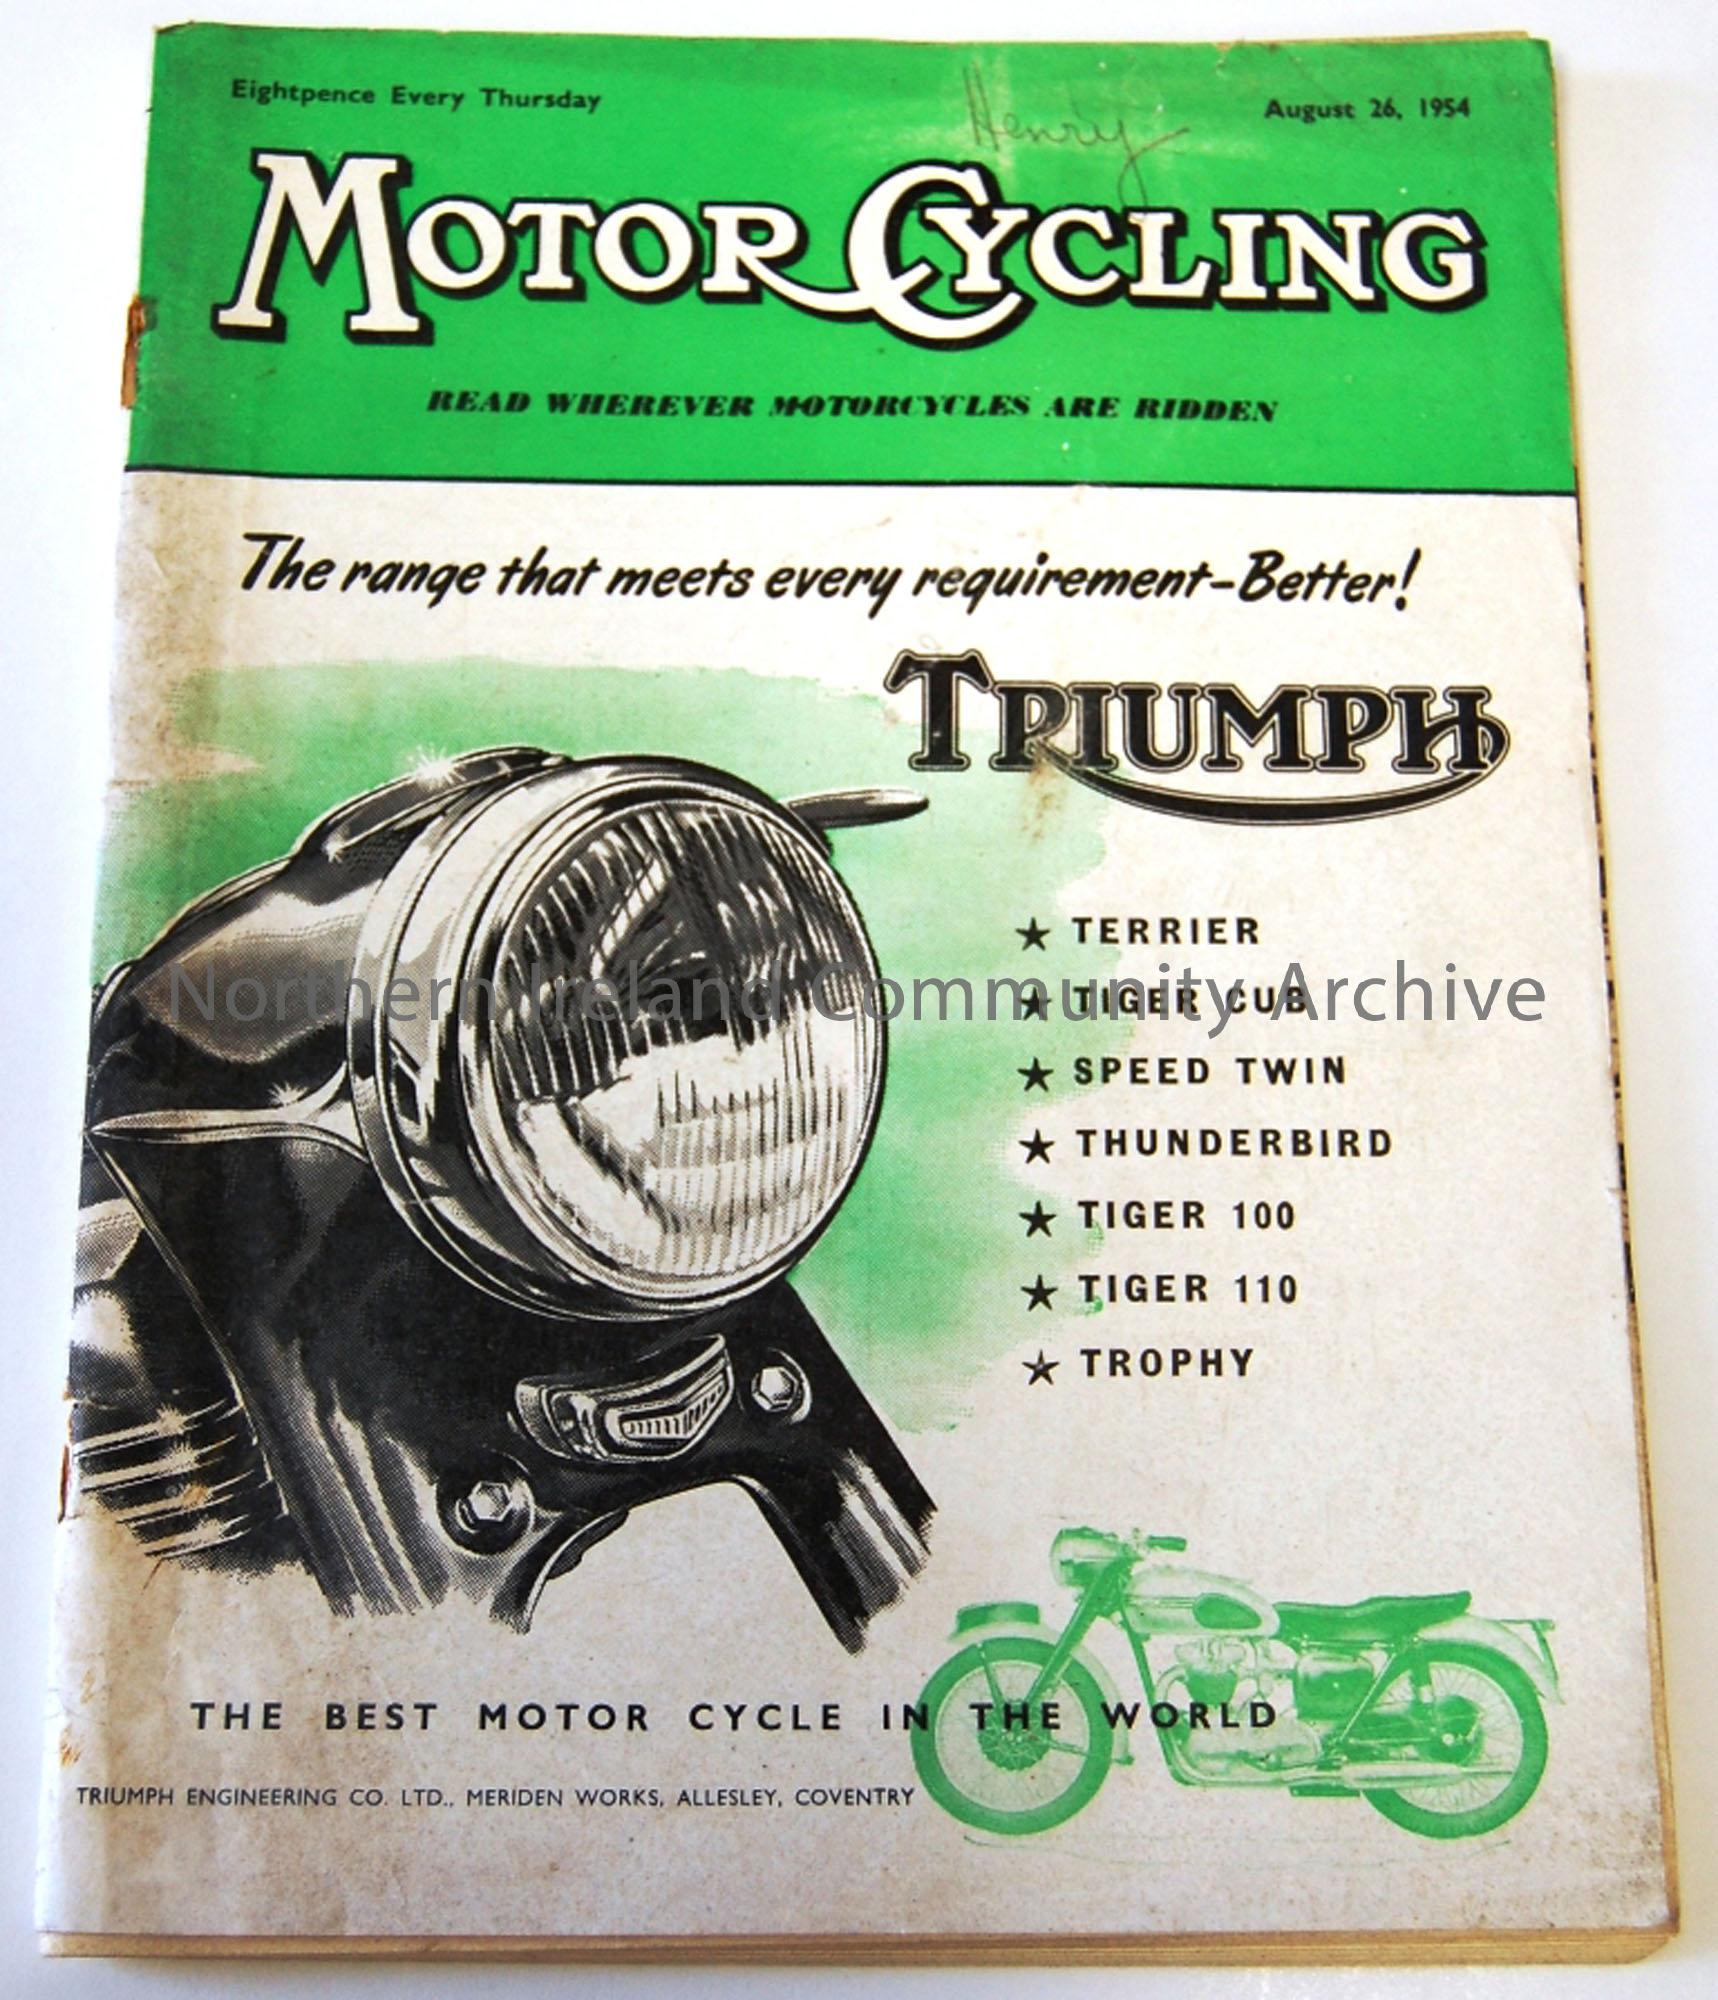 Motor cycling, read wherever motorcyclists are ridden- August 26, 1954